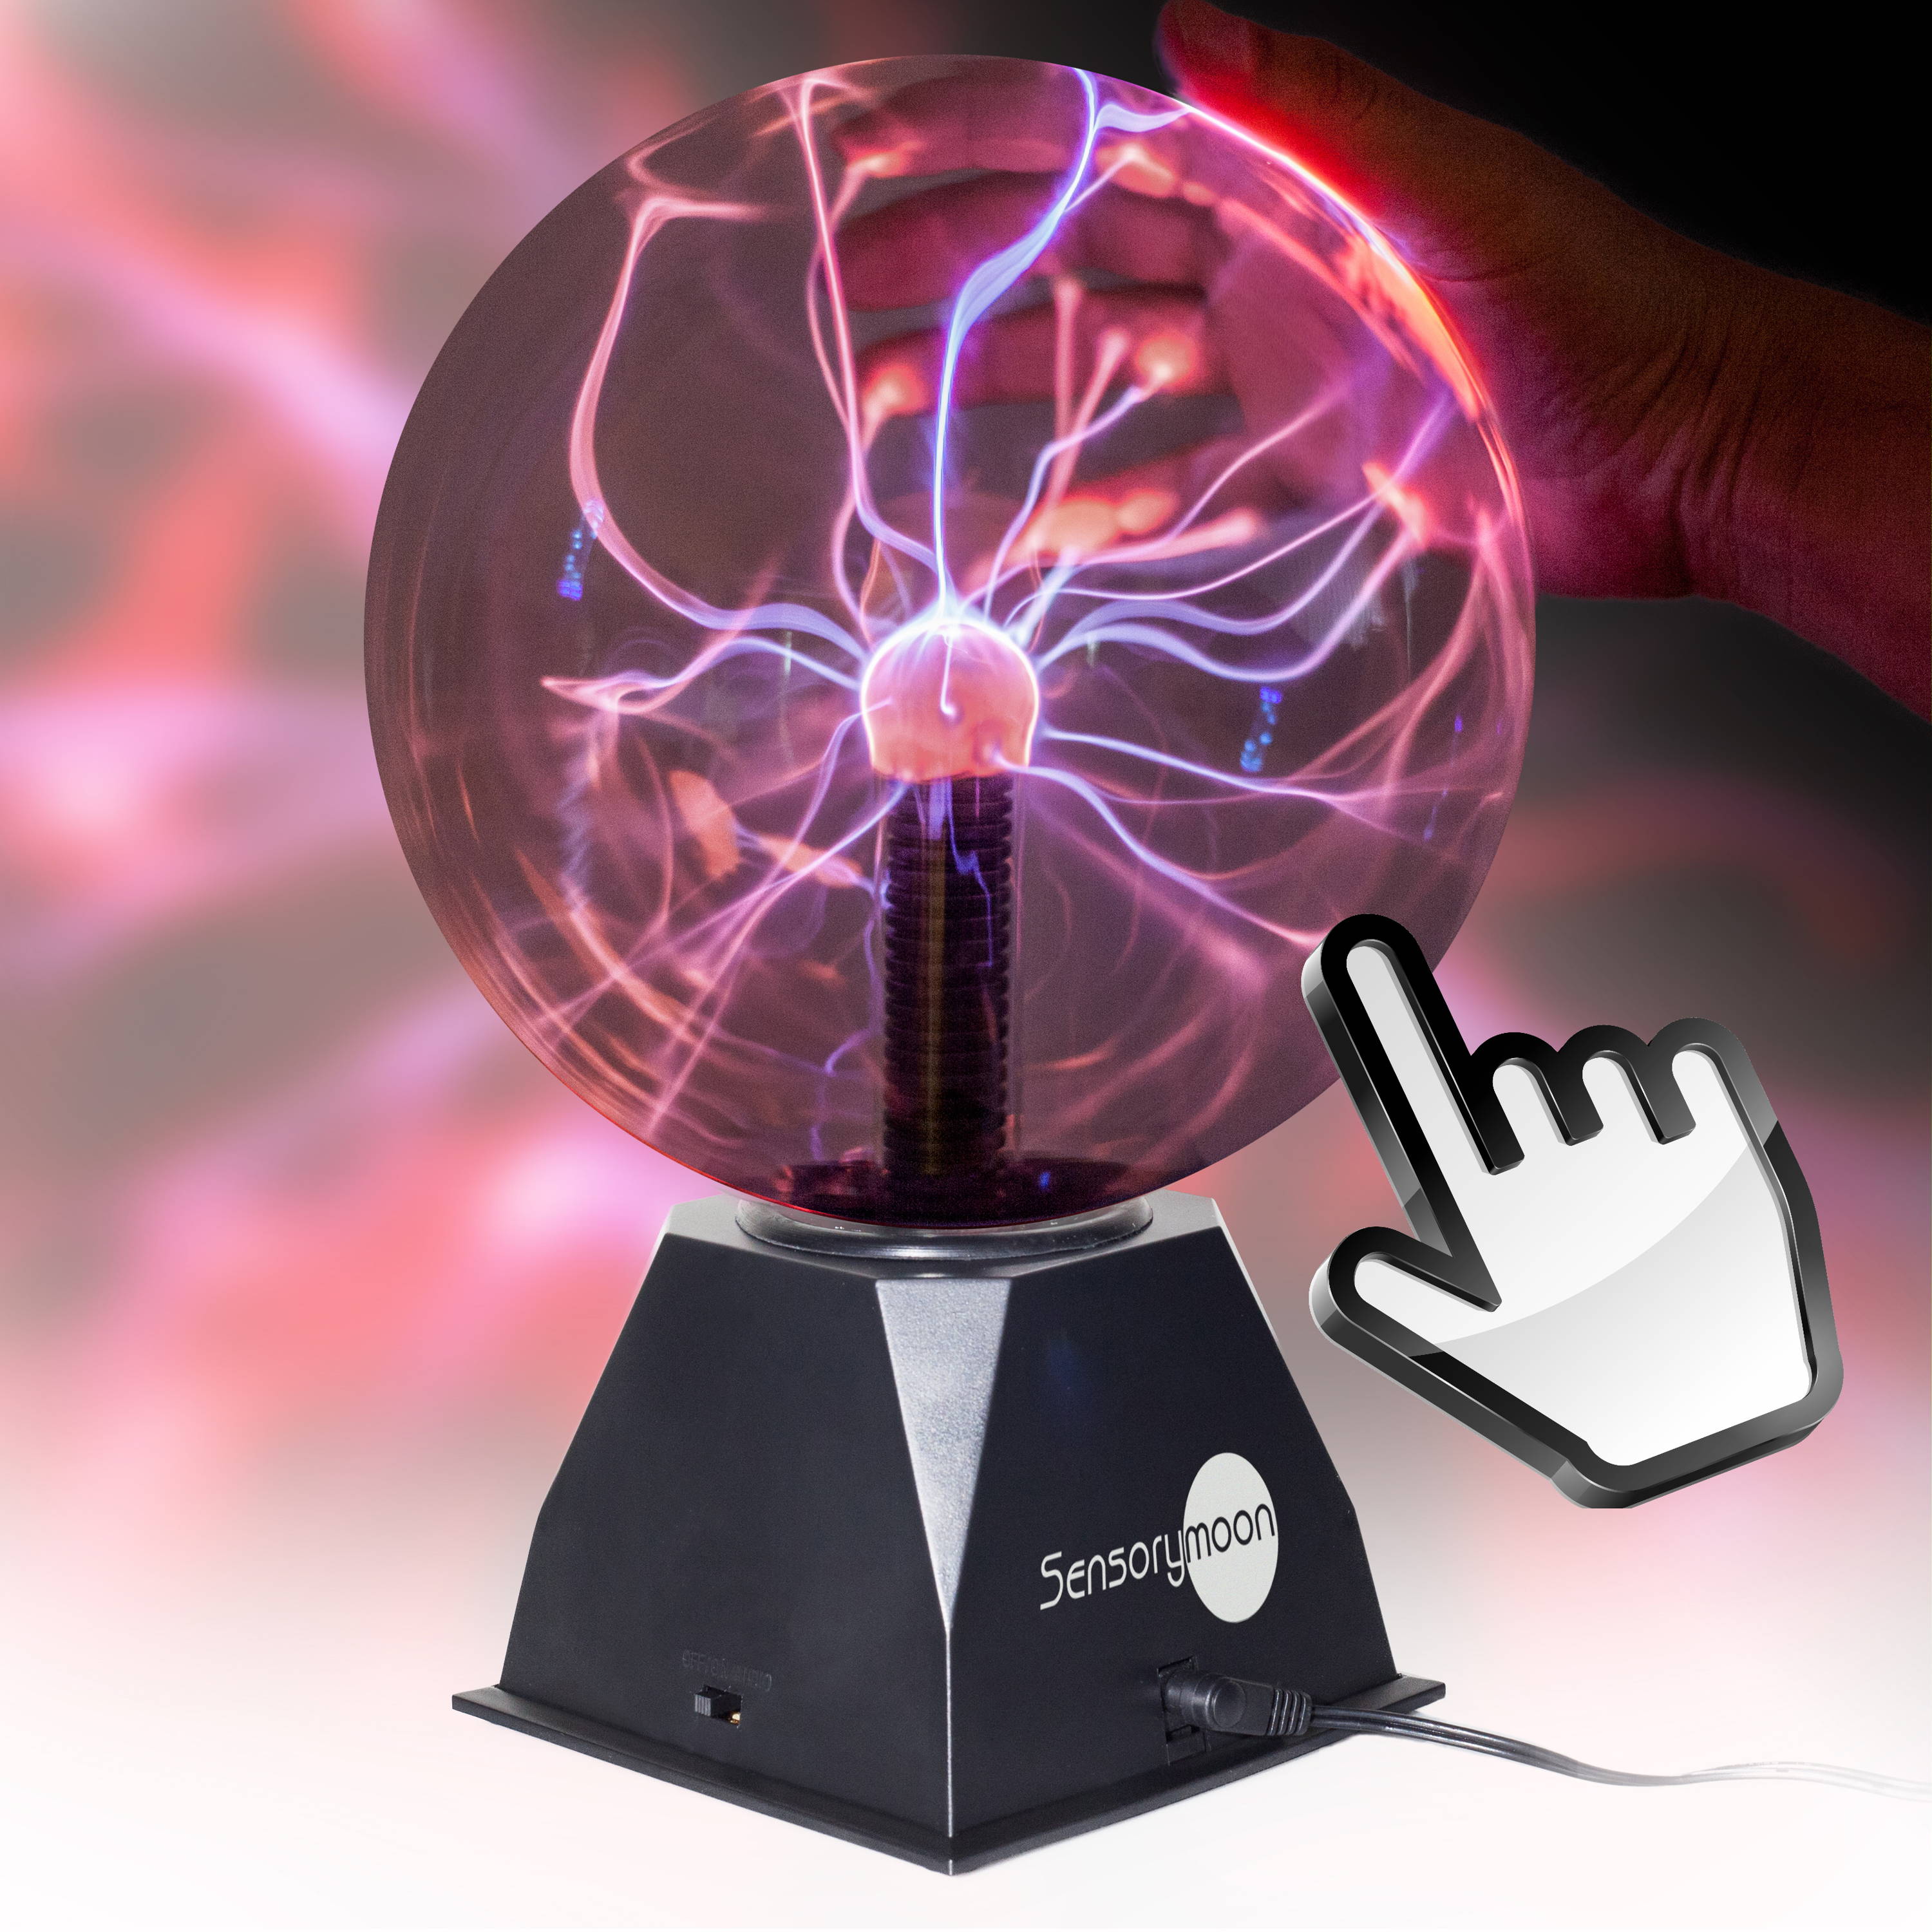 Large Scale Plasma Globes, Museum Quality up to 30 Diameter